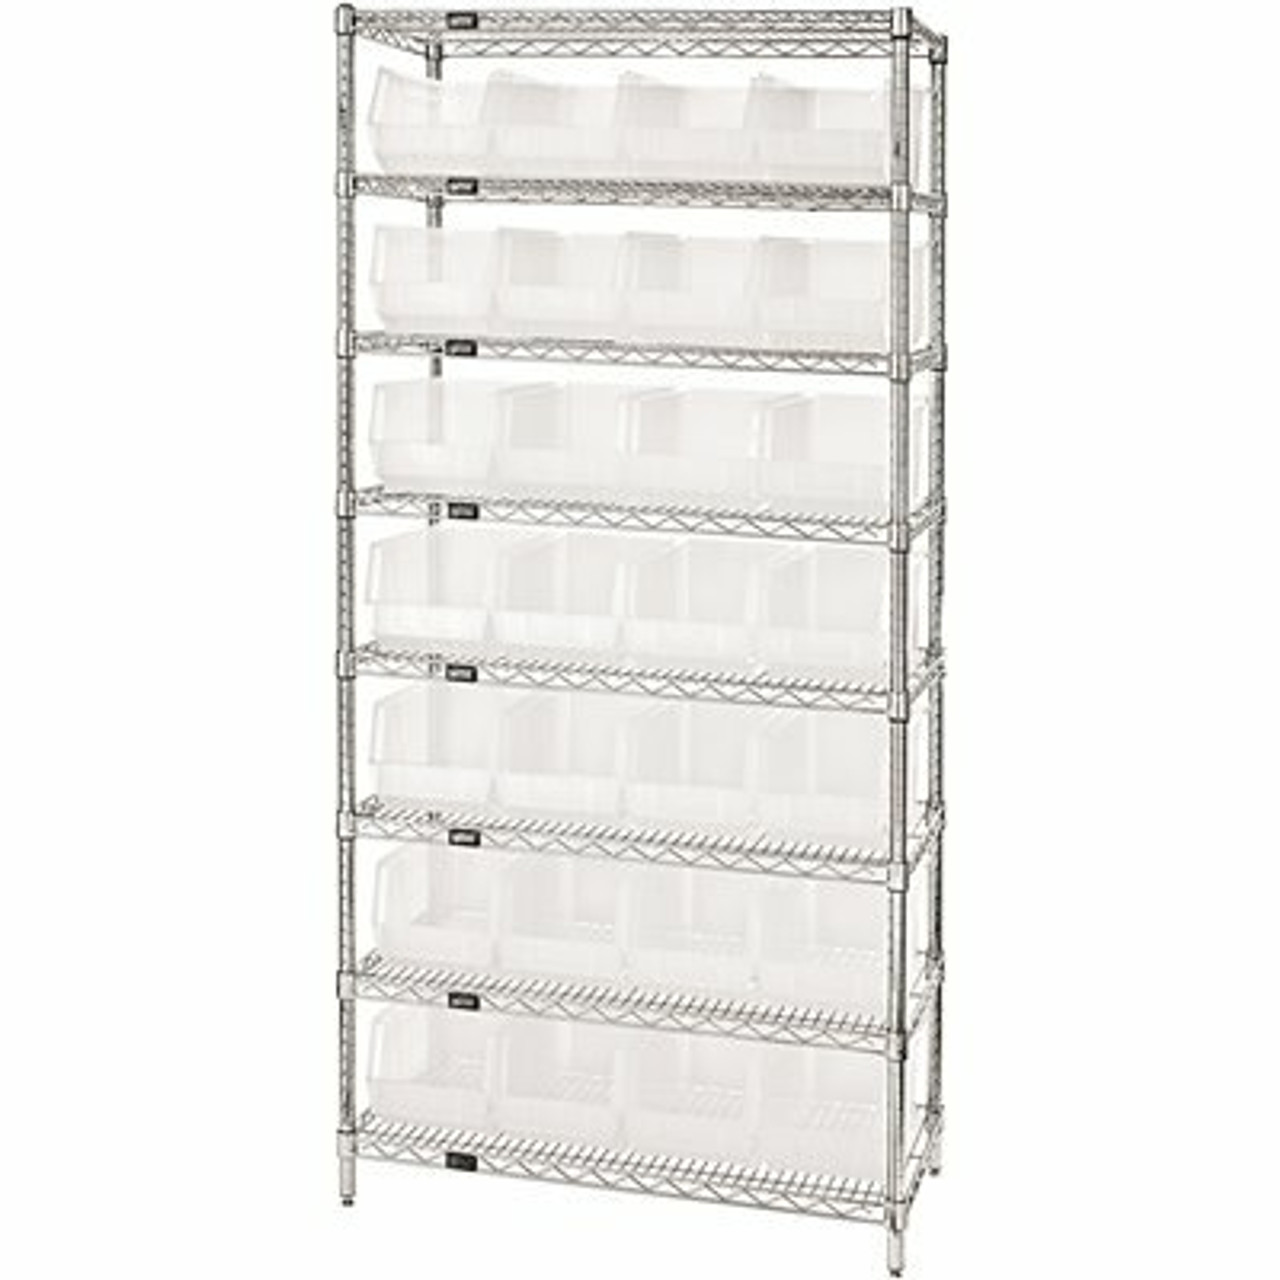 Quantum Storage Systems Giant Open Hopper 36 In. X 14 In. X 74 In. Wire Chrome Heavy Duty 8-Tier Industrial Shelving Unit - 308241559